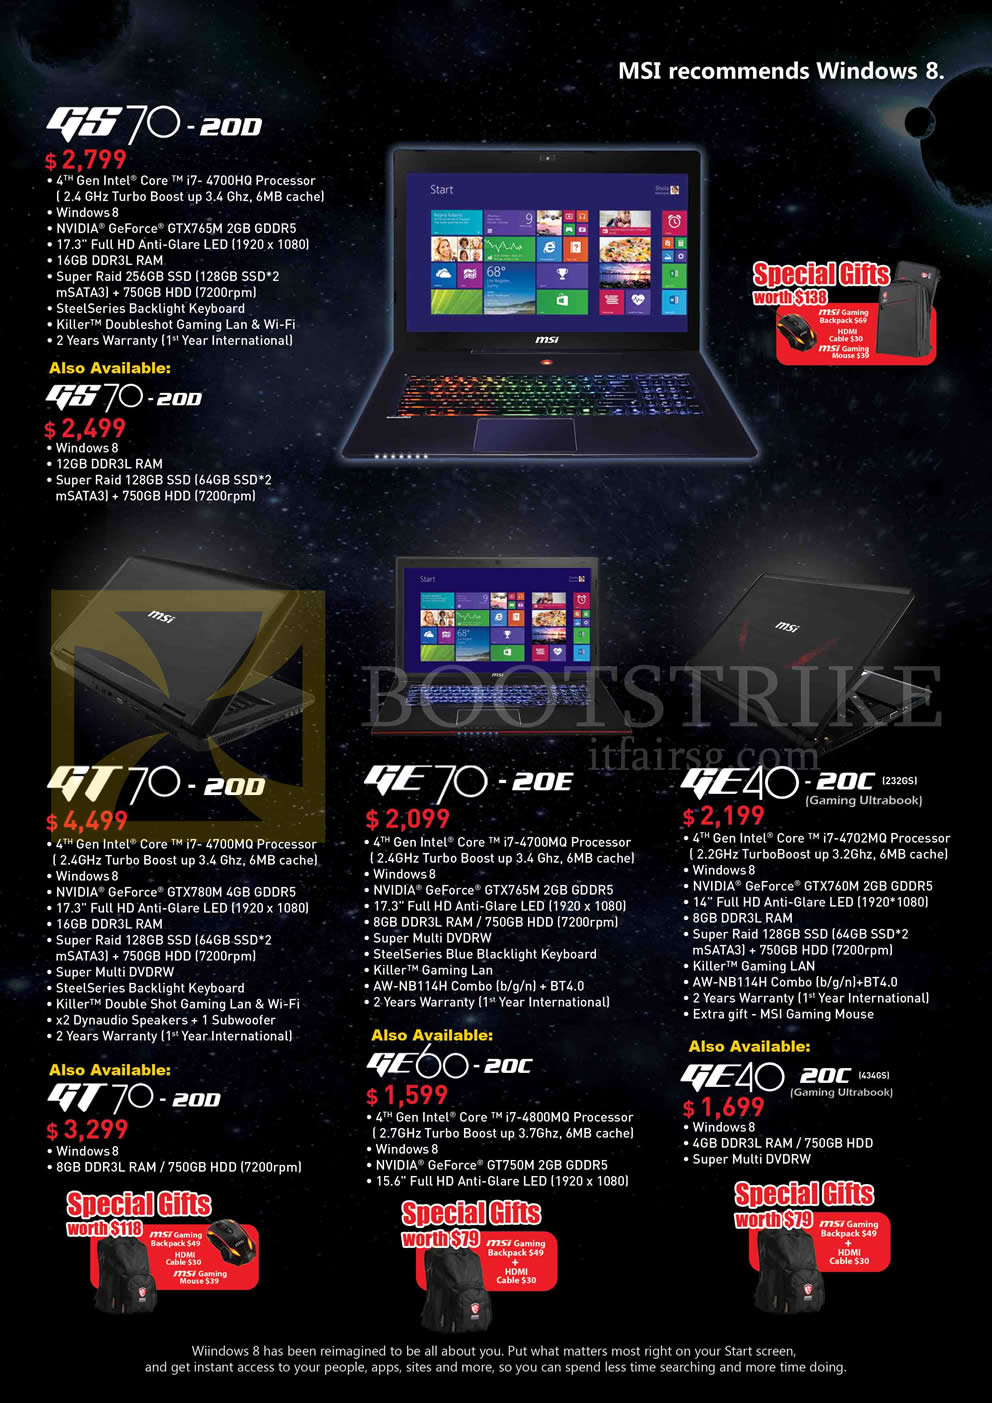 IT SHOW 2014 price list image brochure of MSI Notebooks GS70-20D, GT70-20D, GE70-20E, GE40-20C, GE60-20C